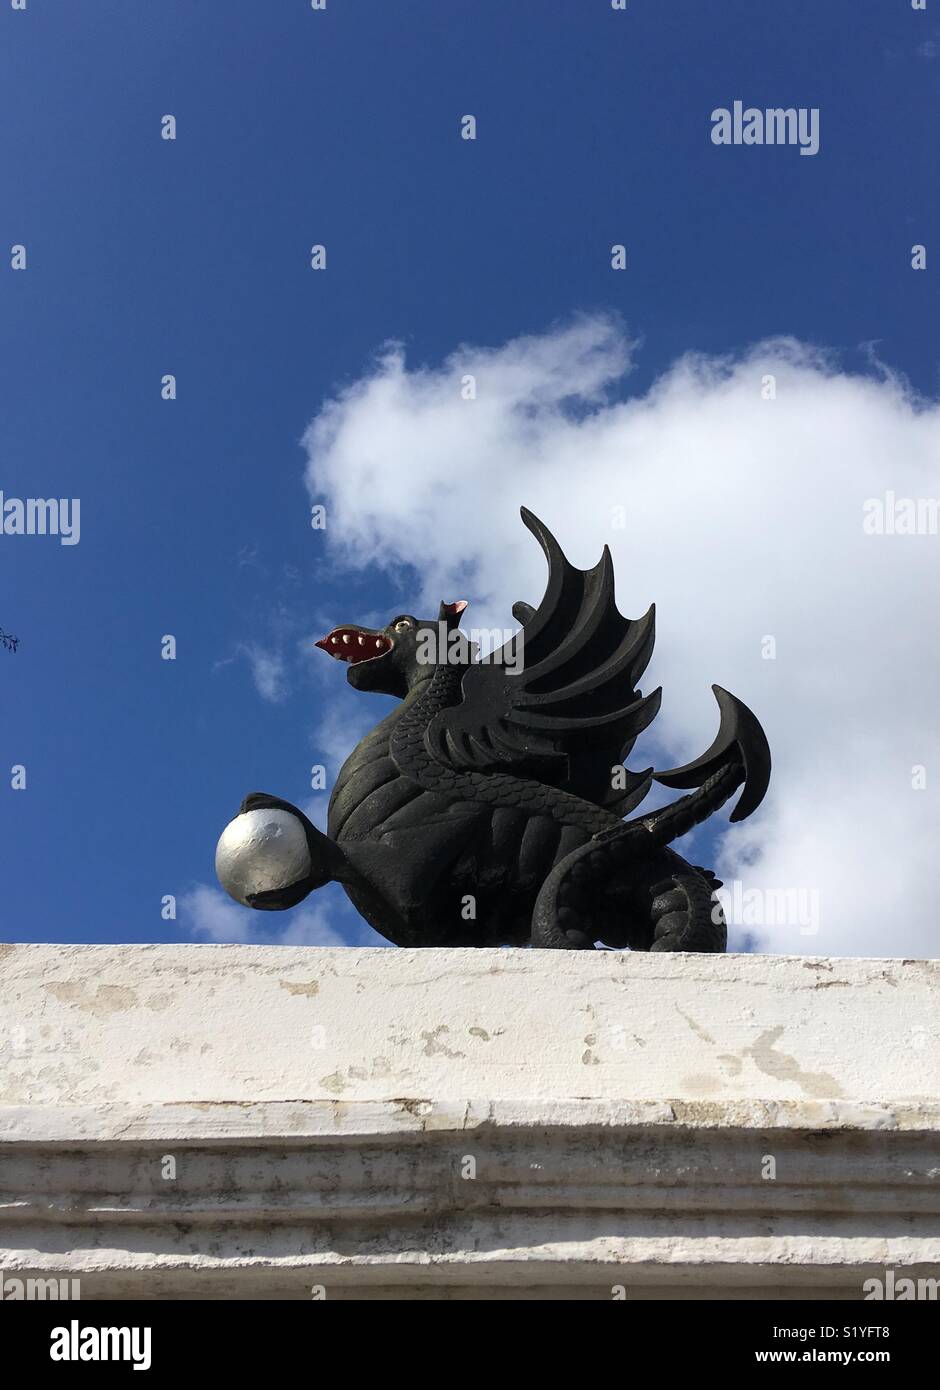 Statue of a dragon clutching a silver ball. Stock Photo